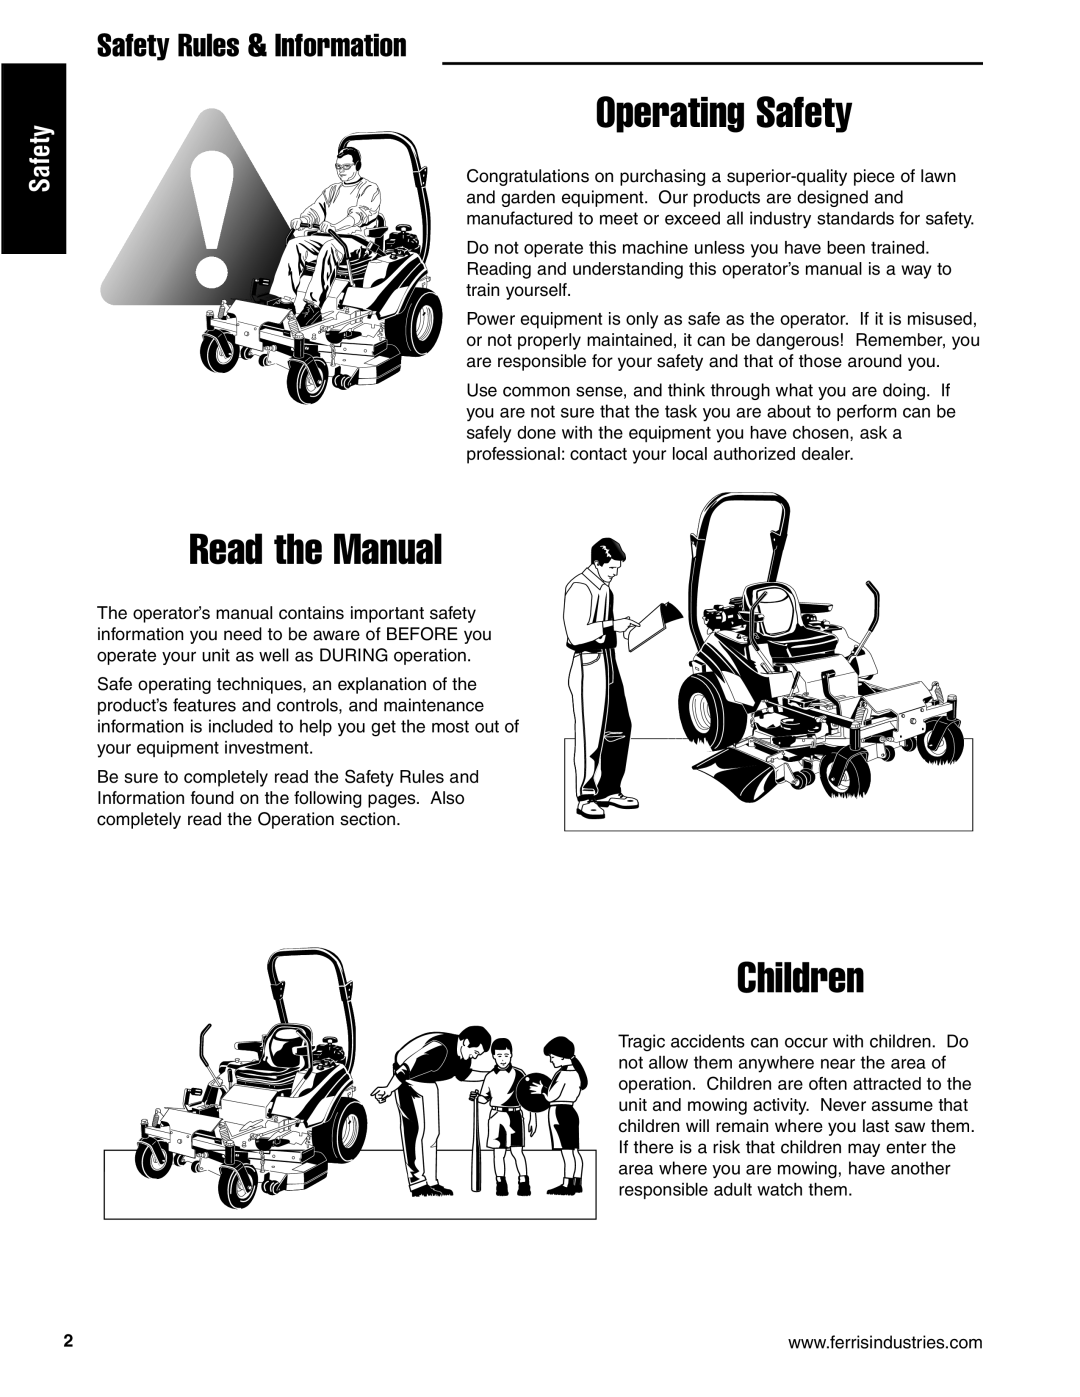 Ferris Industries 5900626, 5901180, 5901181, 5901178 Operating Safety, Read the Manual, Children, Safety Rules & Information 